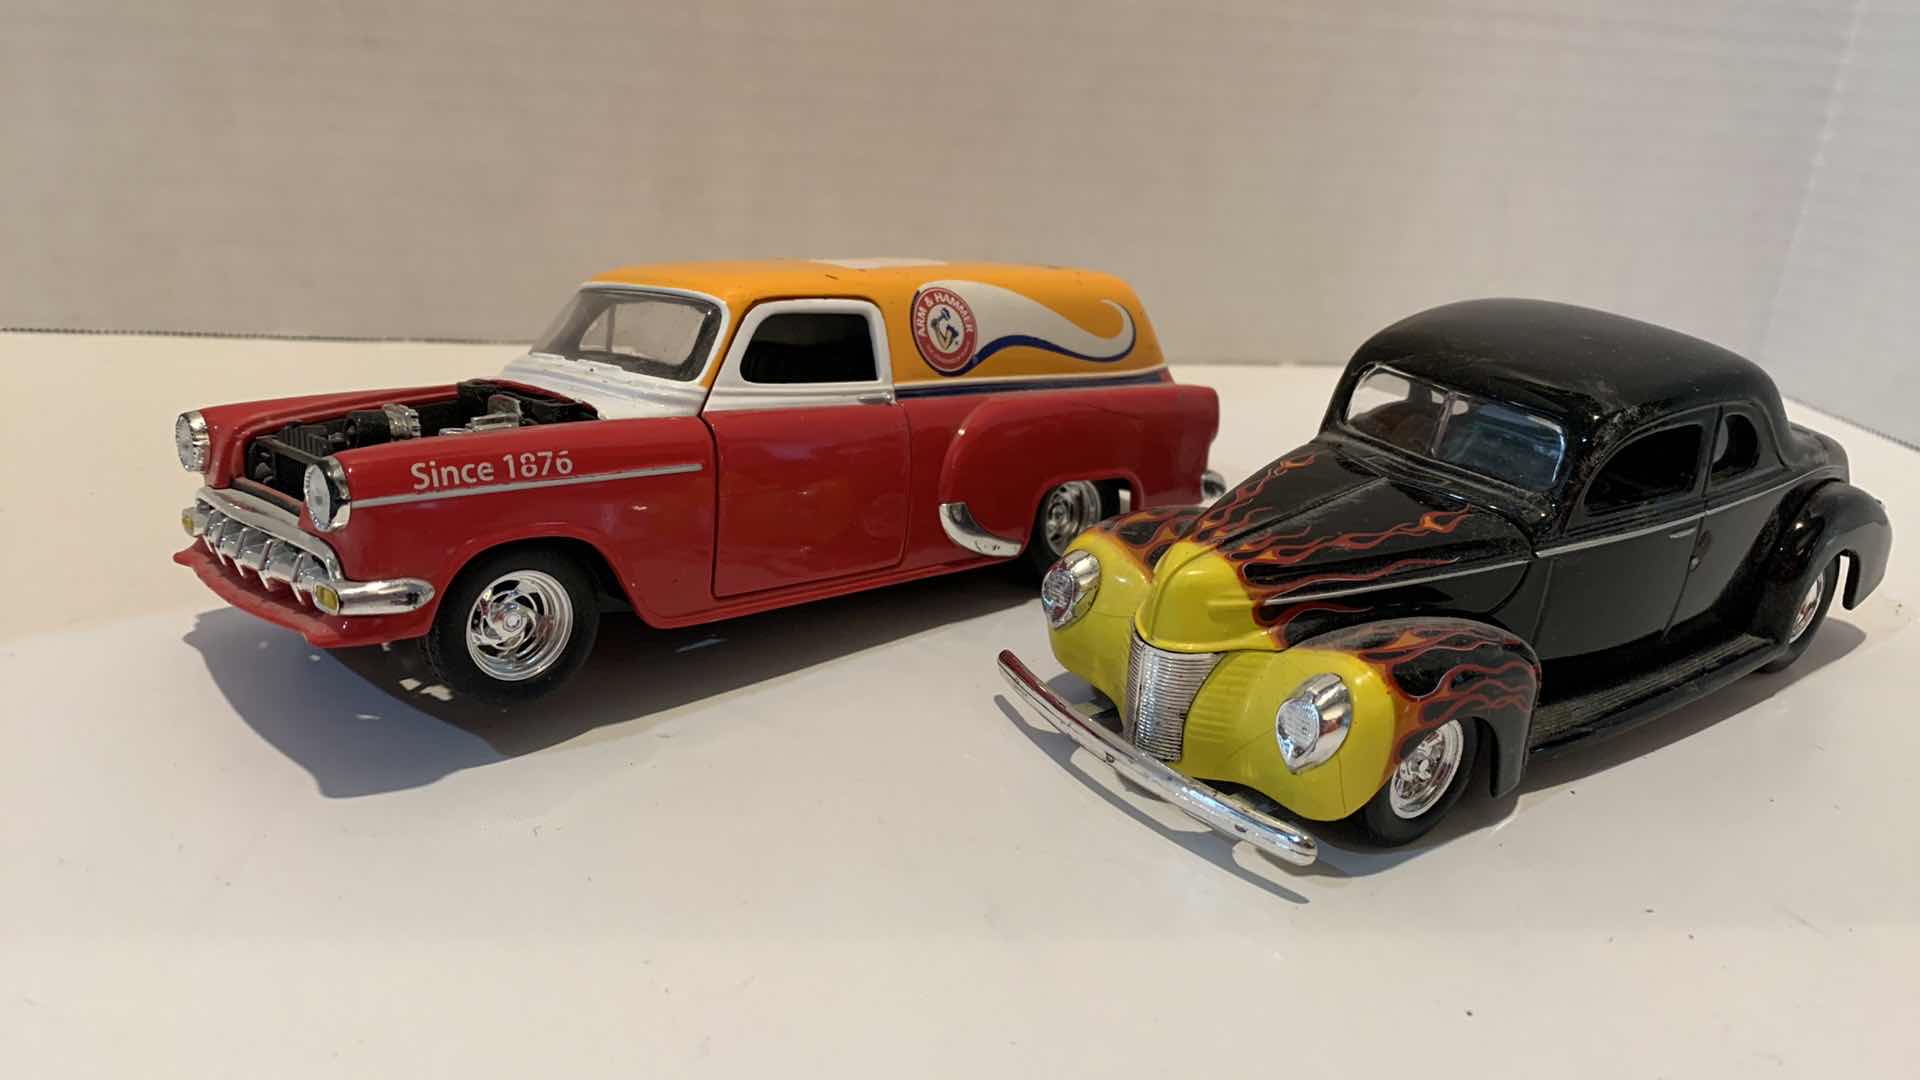 Photo 1 of 2 COLLECTABLE CARS 54 CHEVY